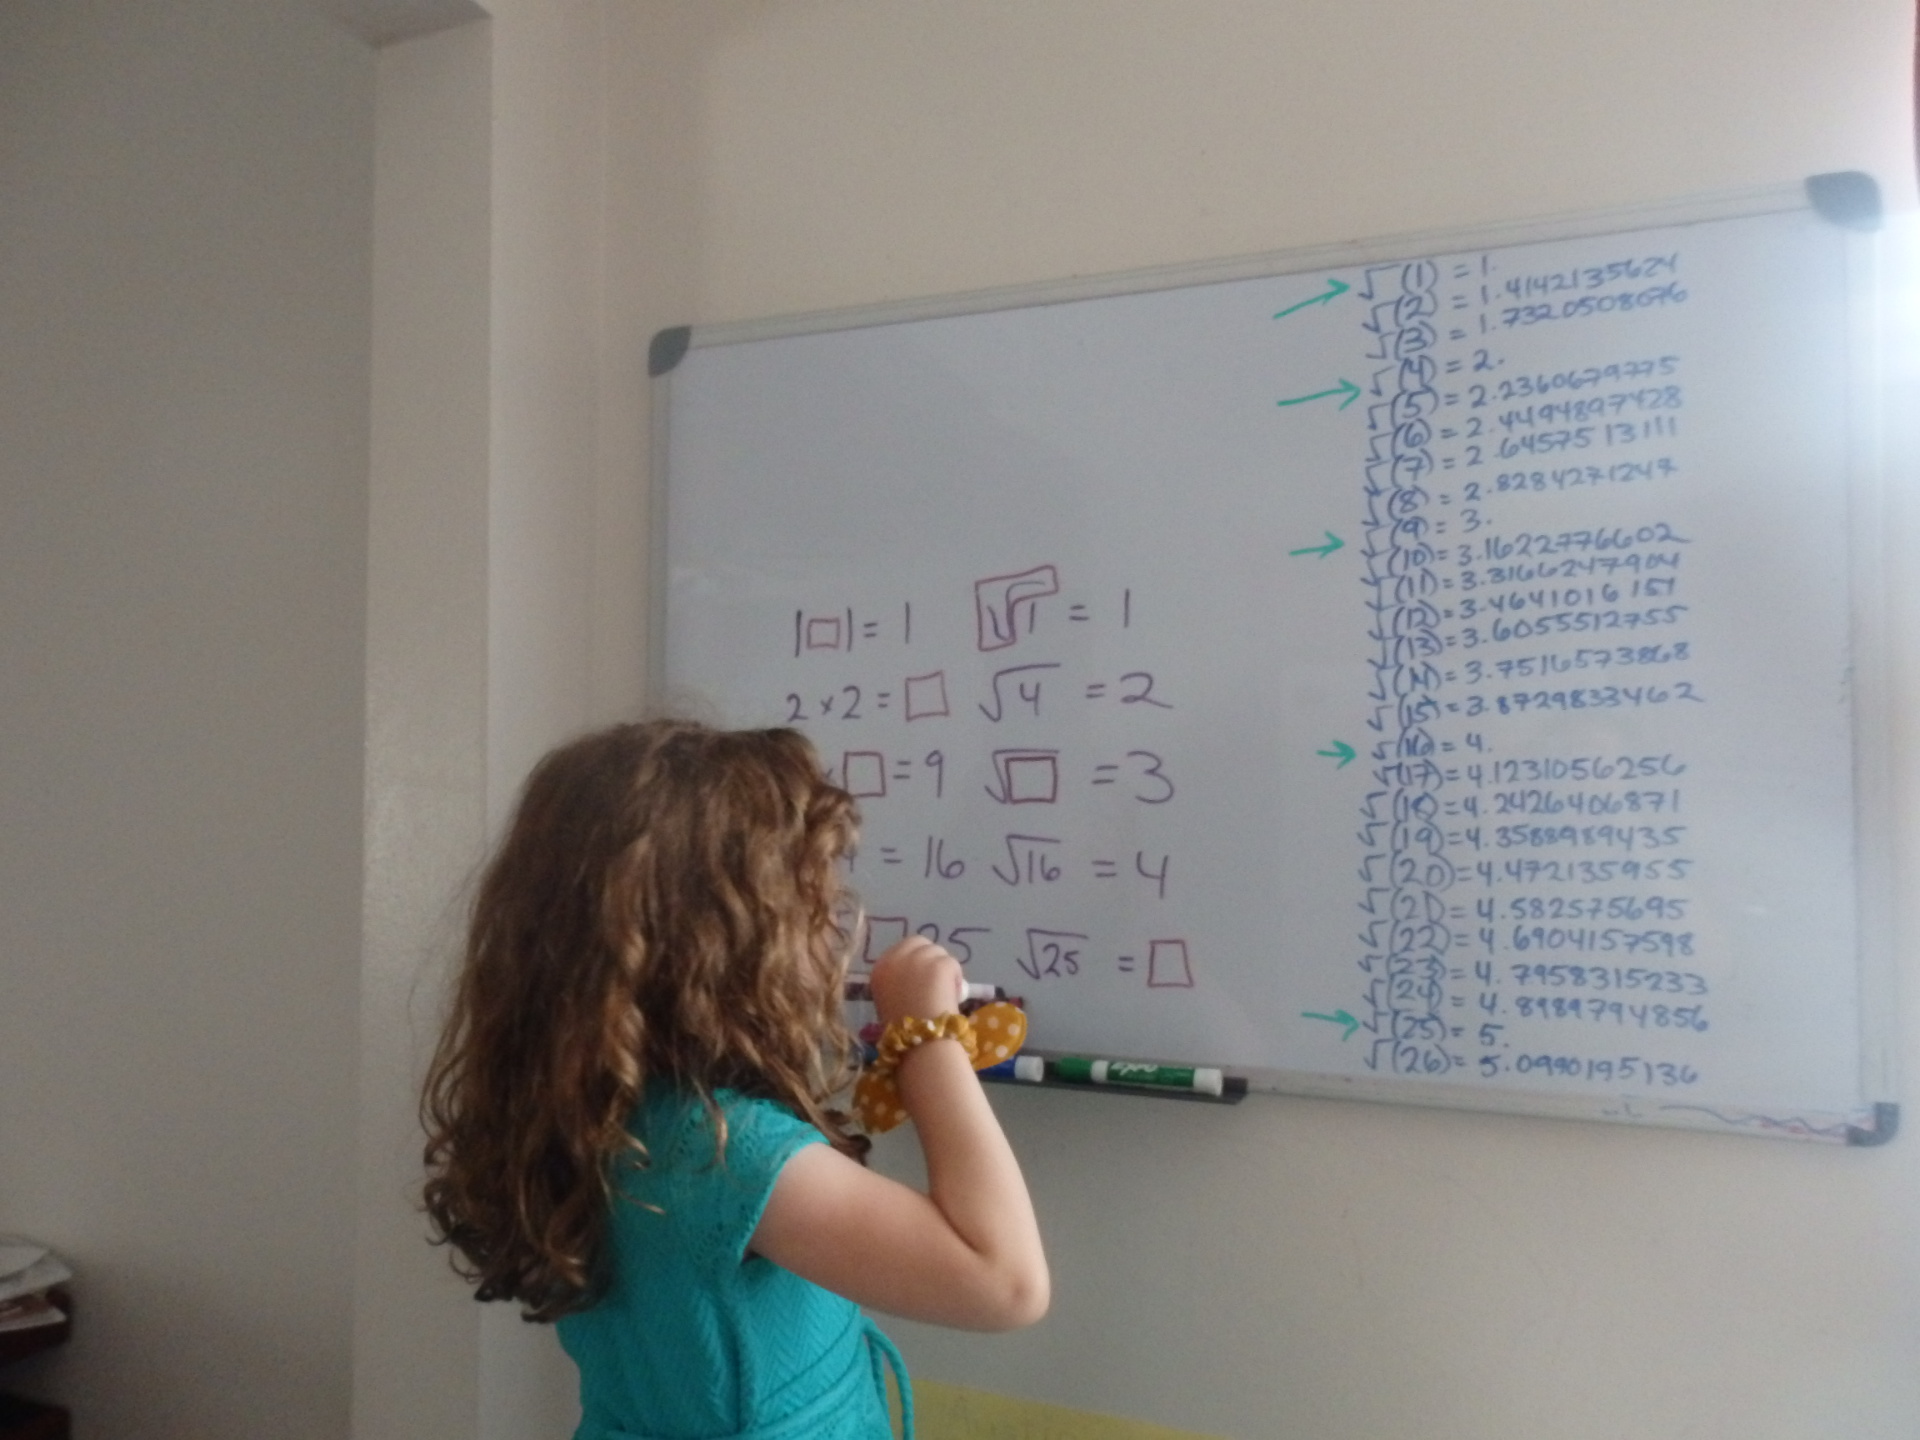 1^2=1, square root of 1=1, continued up to 5.  Some are erased and Heidi is filling in the erased numbers.